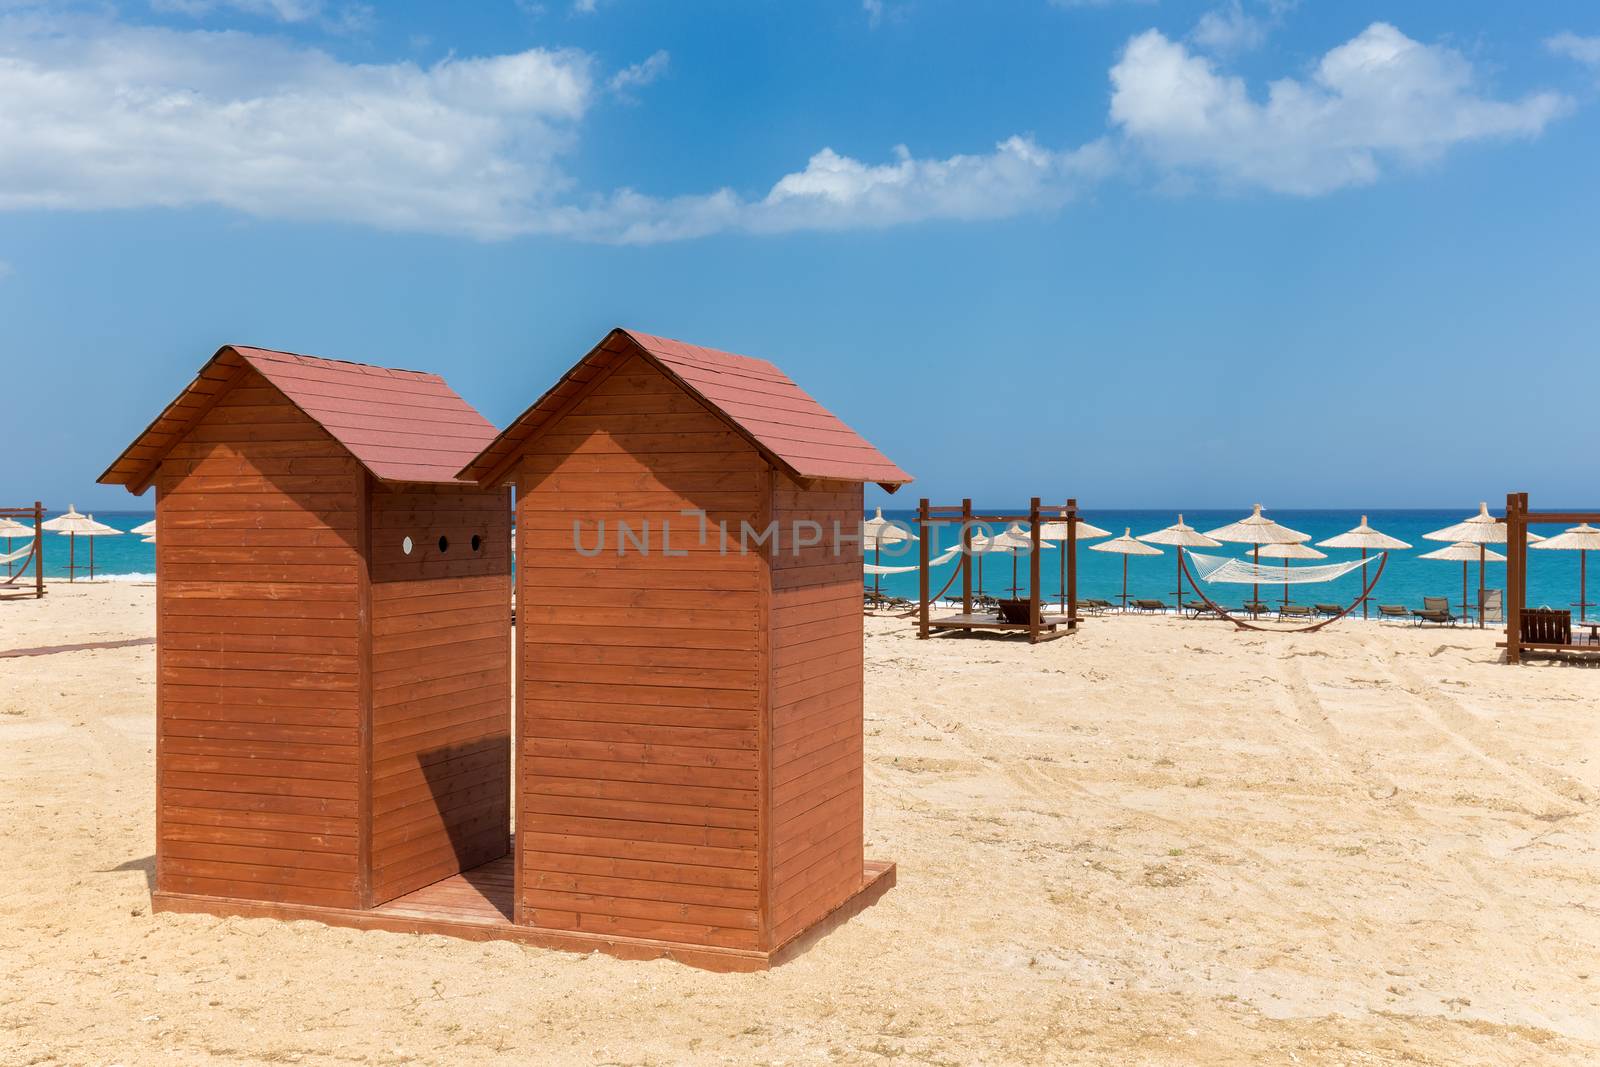 Two wooden beach huts with umbrellas on  sandy shore in Greece